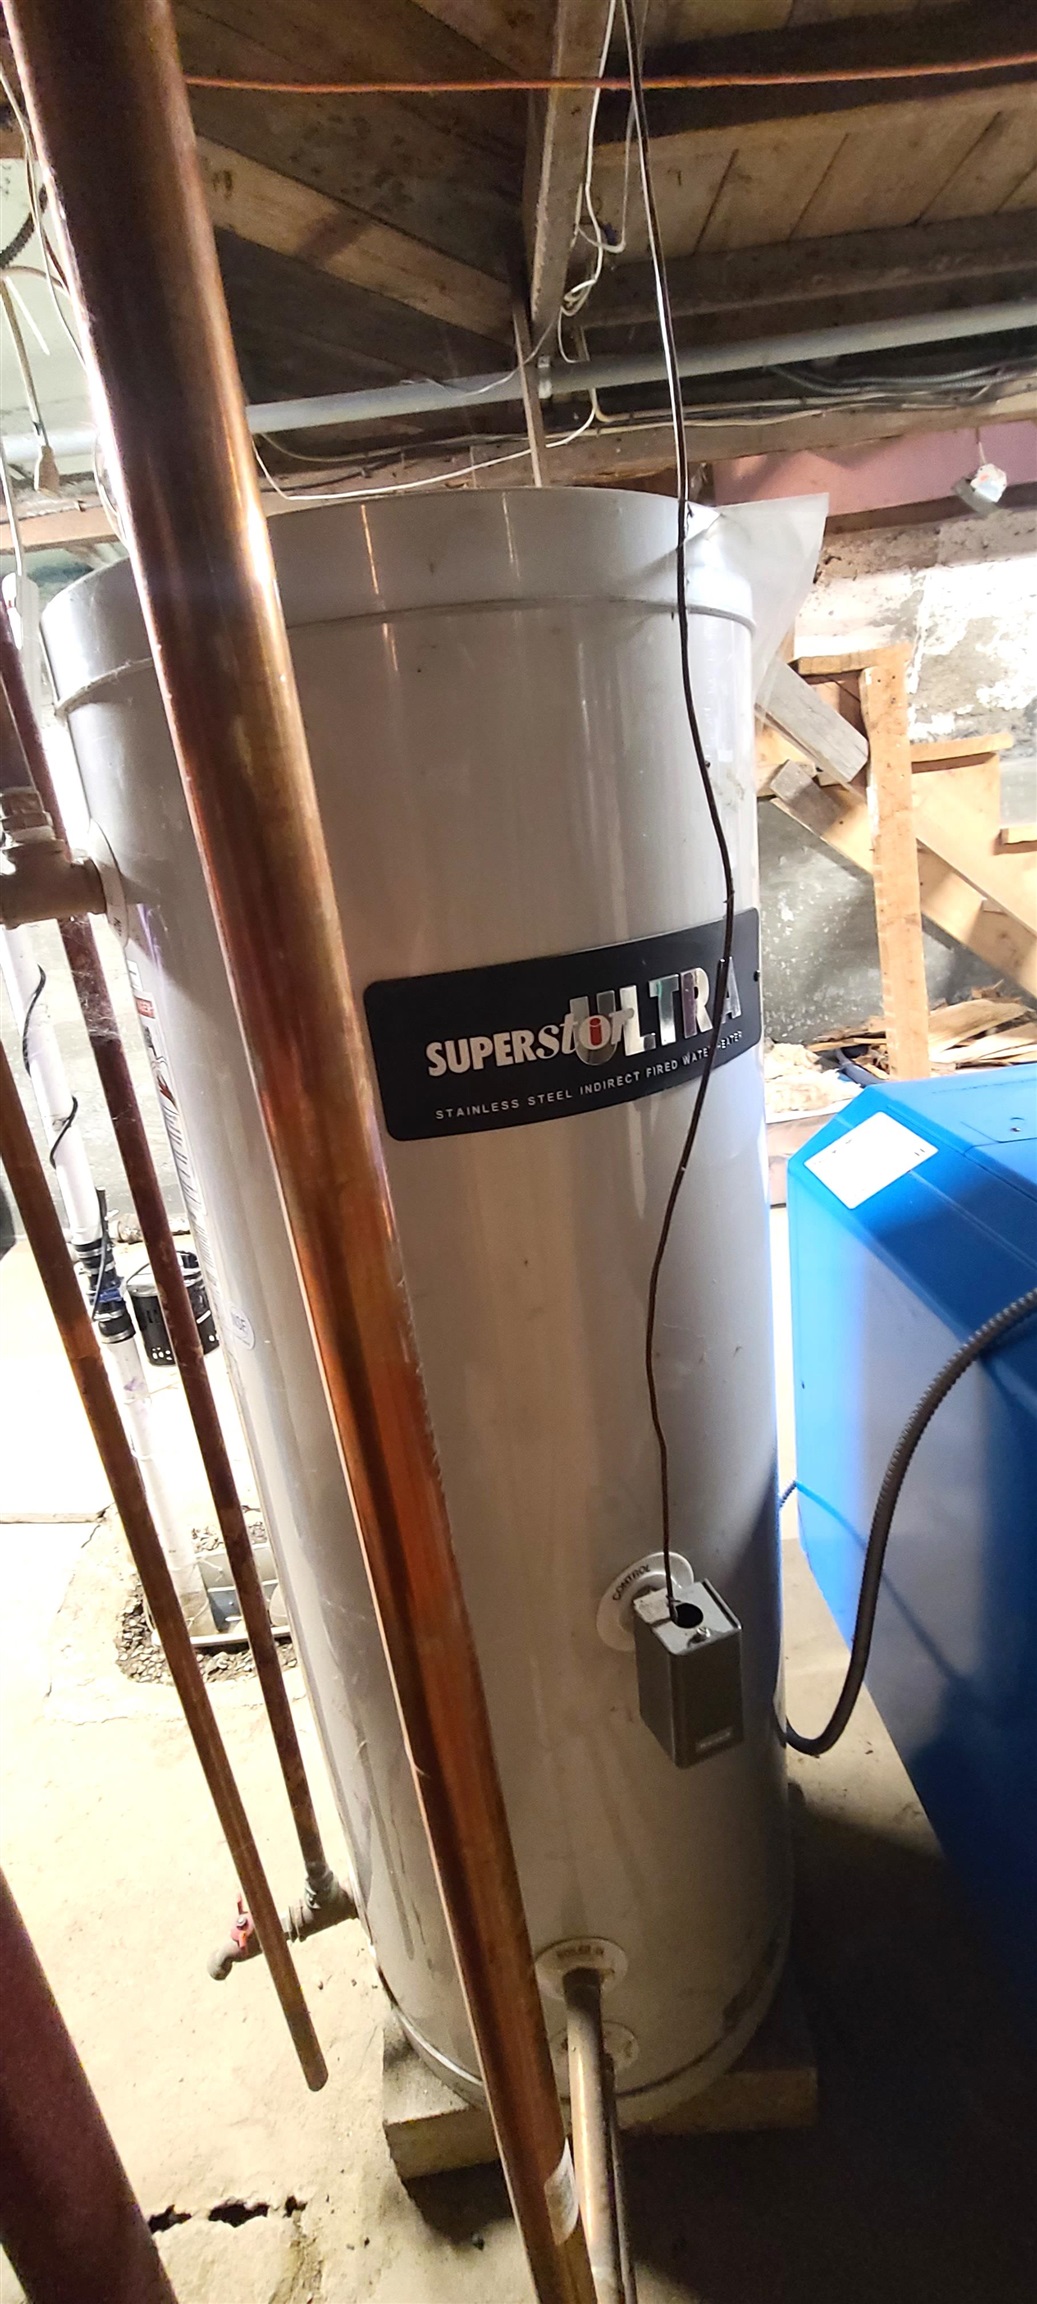 Superstore hot water tank